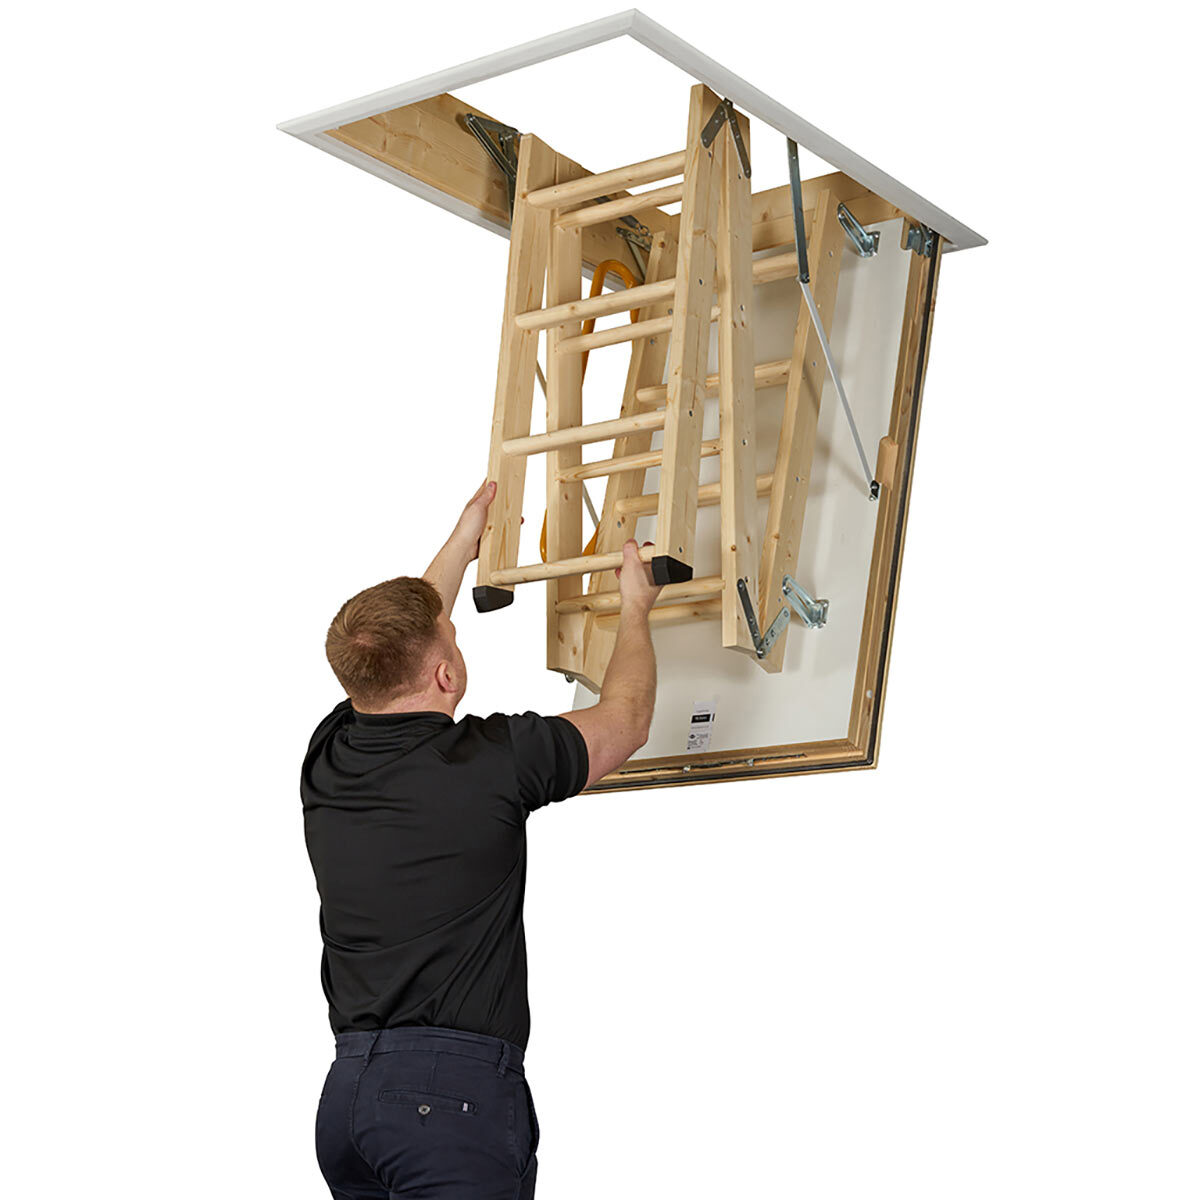 Cut out image of loft ladder being folded away on white background